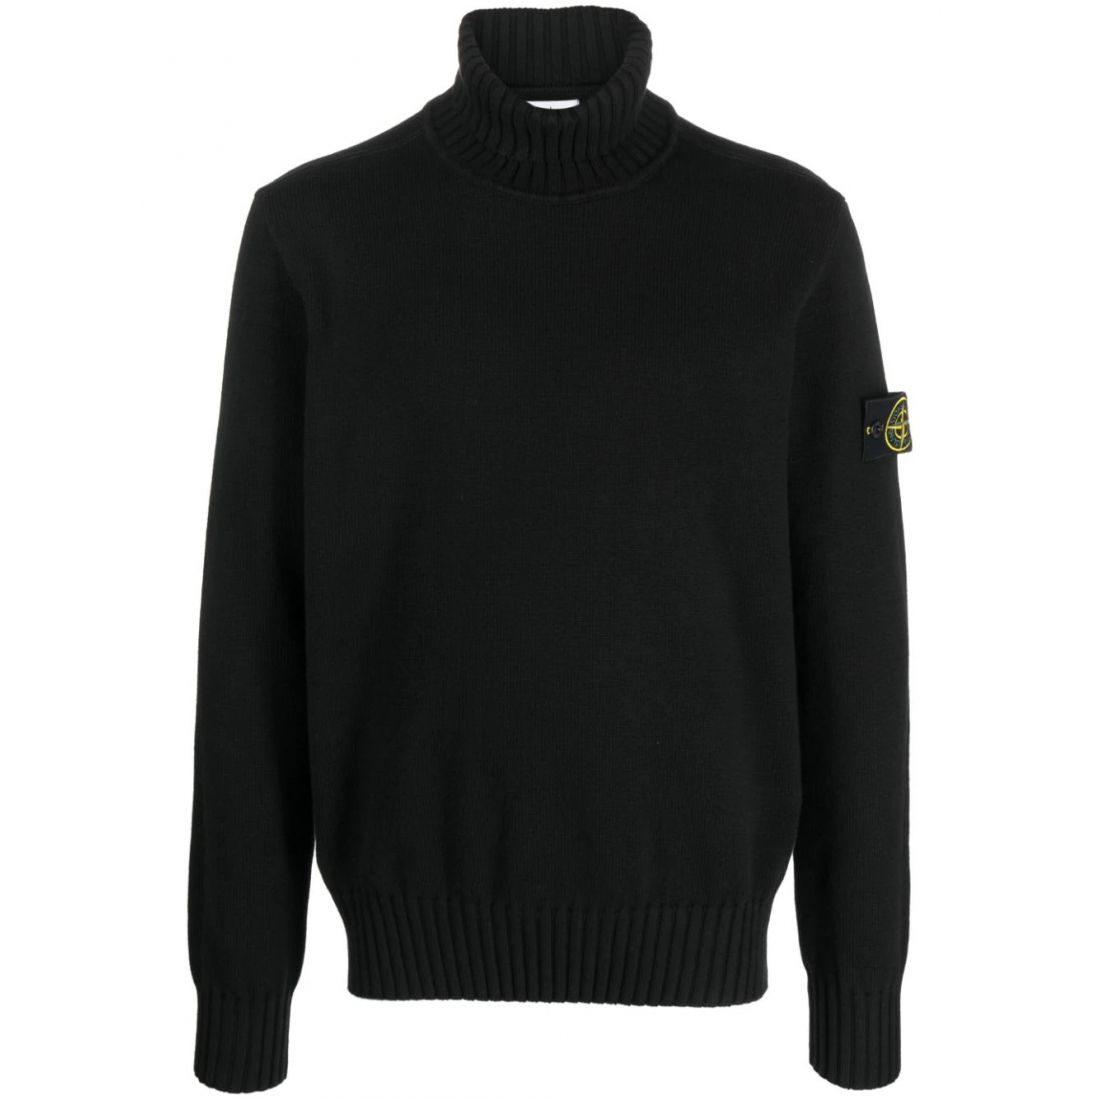 Stone Island - Pull 'Compass' pour Hommes